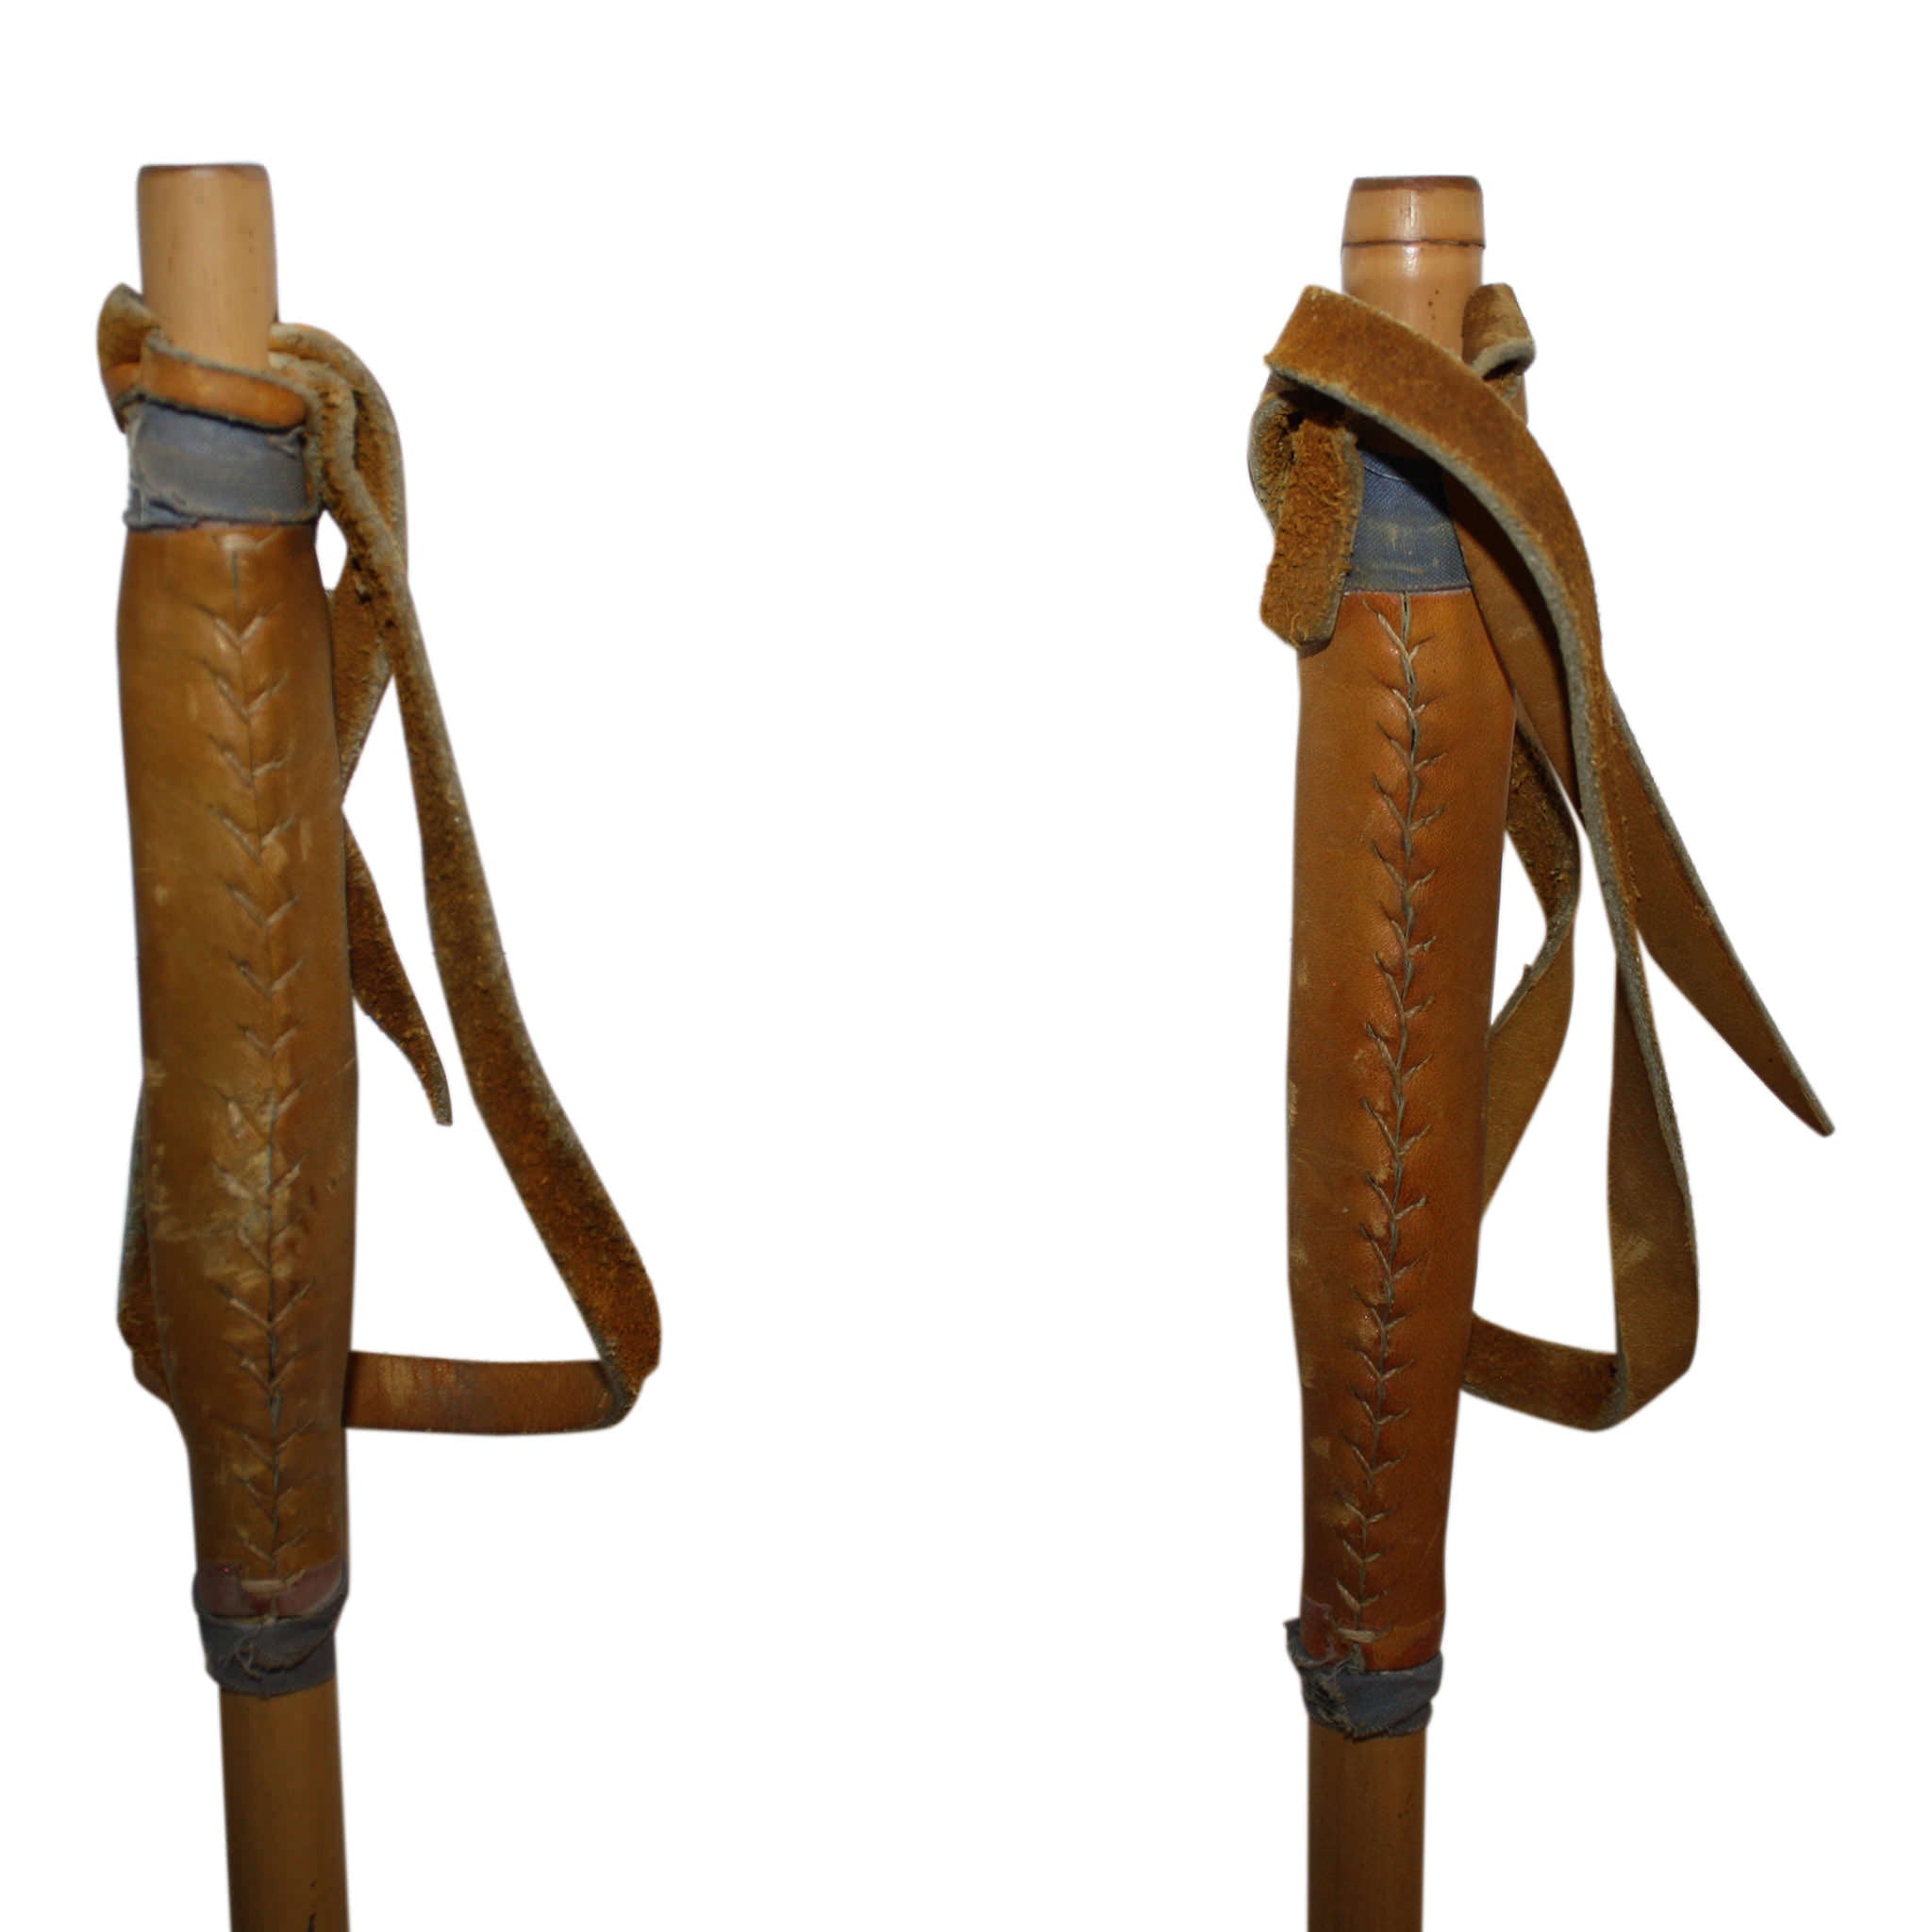 Bamboo Ski Poles with Leather Grips